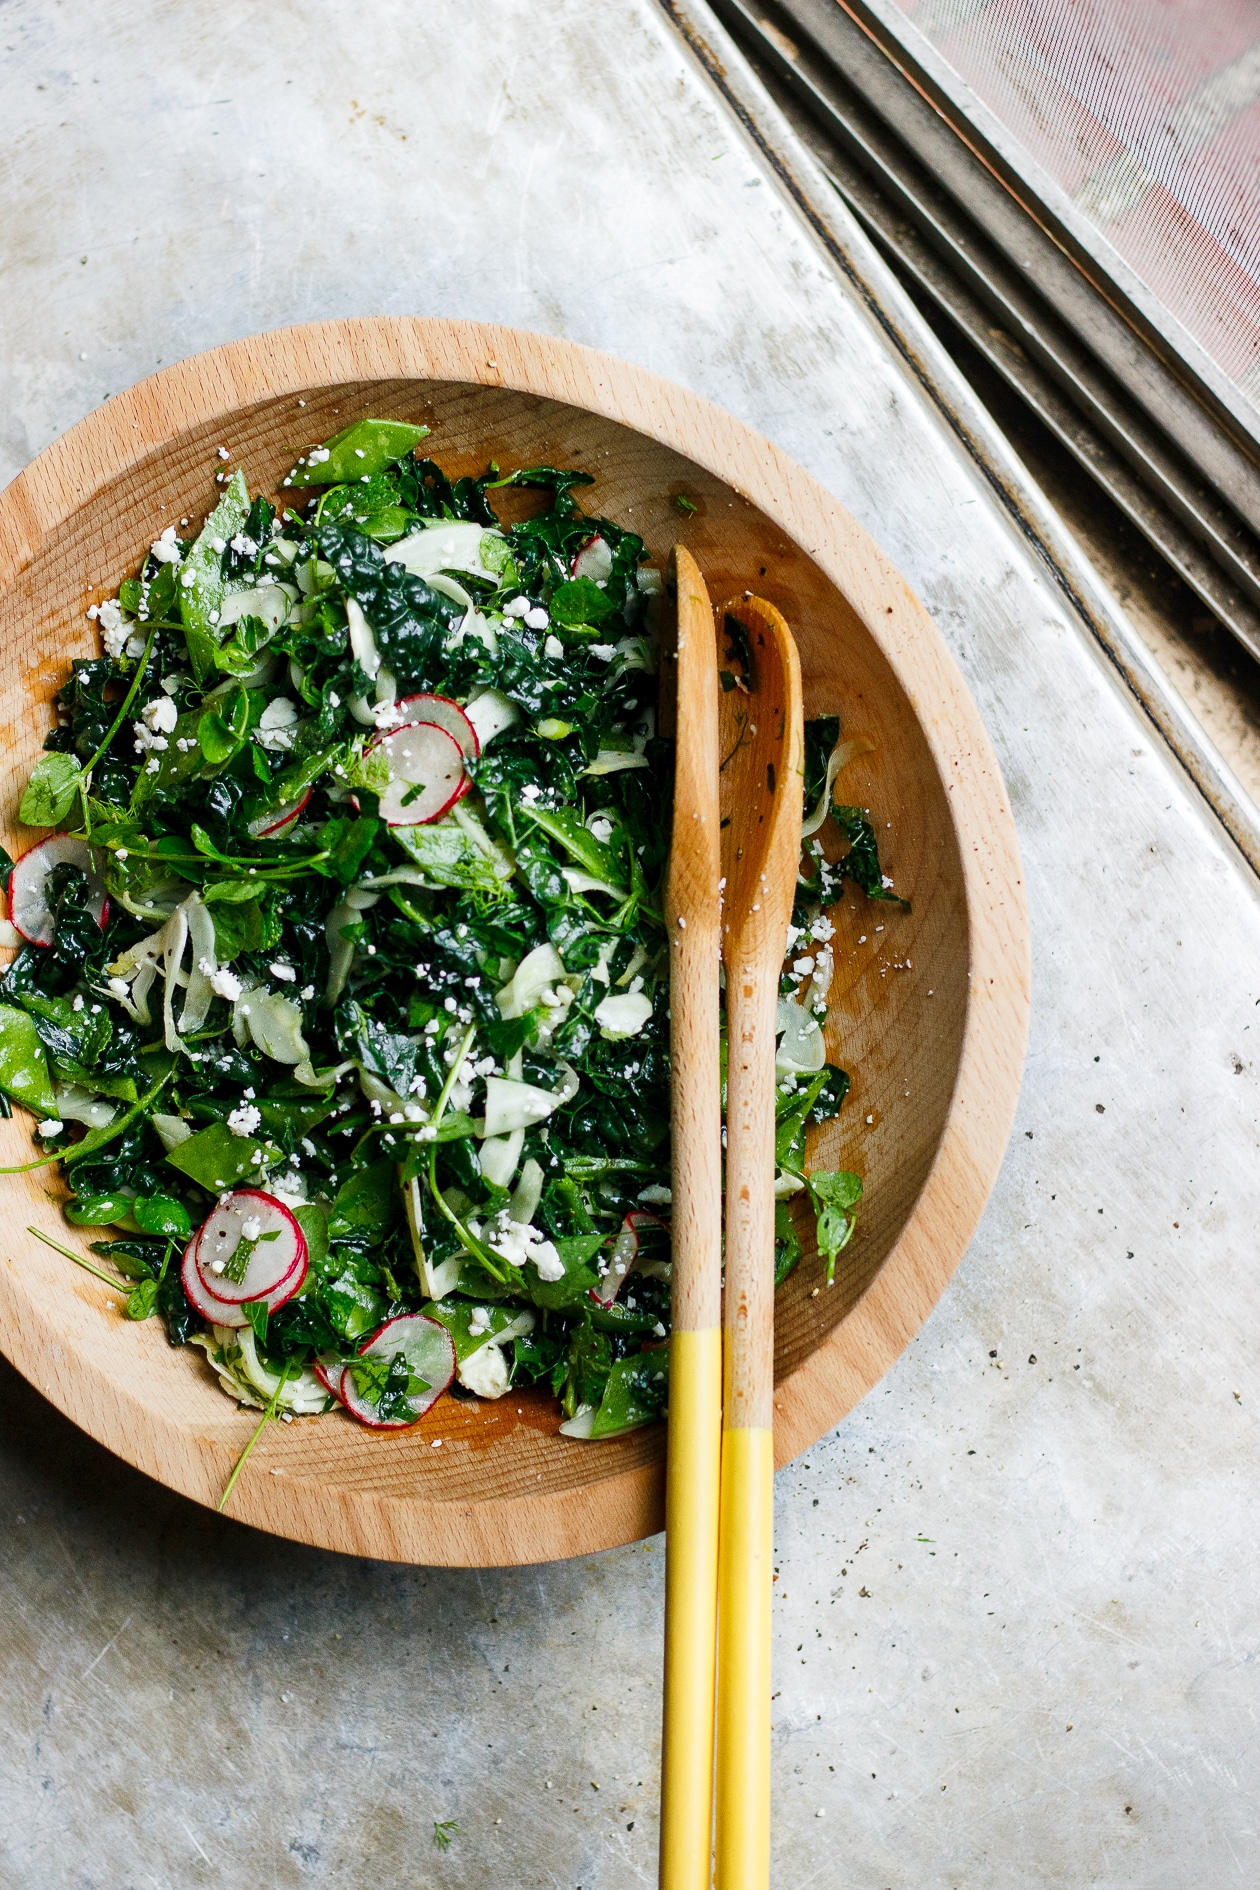 Lemony Fennel Radish + Kale Salad with Herbs + Feta | Lemony fennel, radish, spring pea and kale salad loaded with herbs and feta cheese. A bright, vibrant, packed with flavor spring and summer salad. 